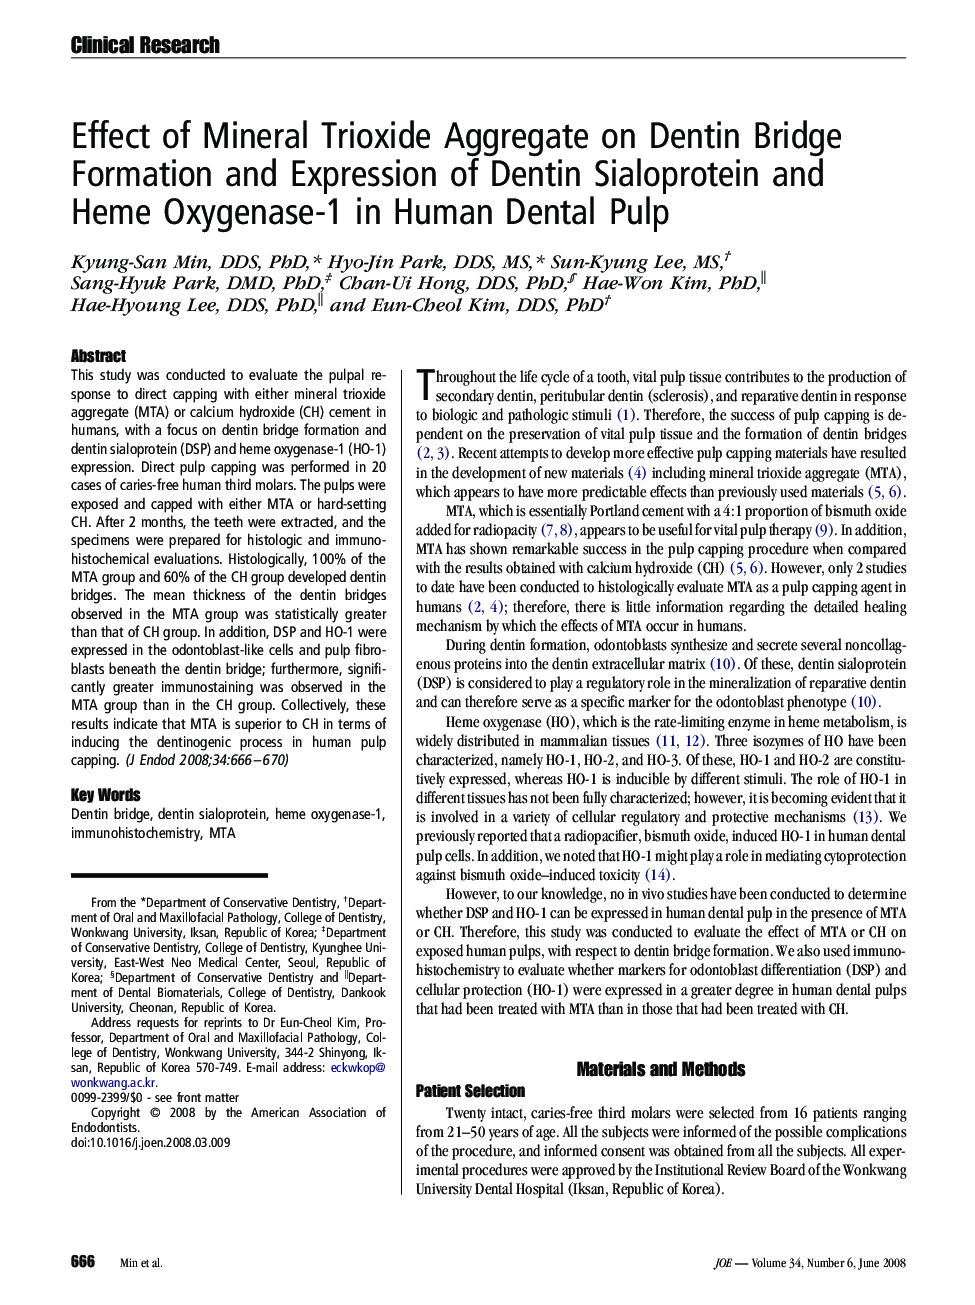 Effect of Mineral Trioxide Aggregate on Dentin Bridge Formation and Expression of Dentin Sialoprotein and Heme Oxygenase-1 in Human Dental Pulp